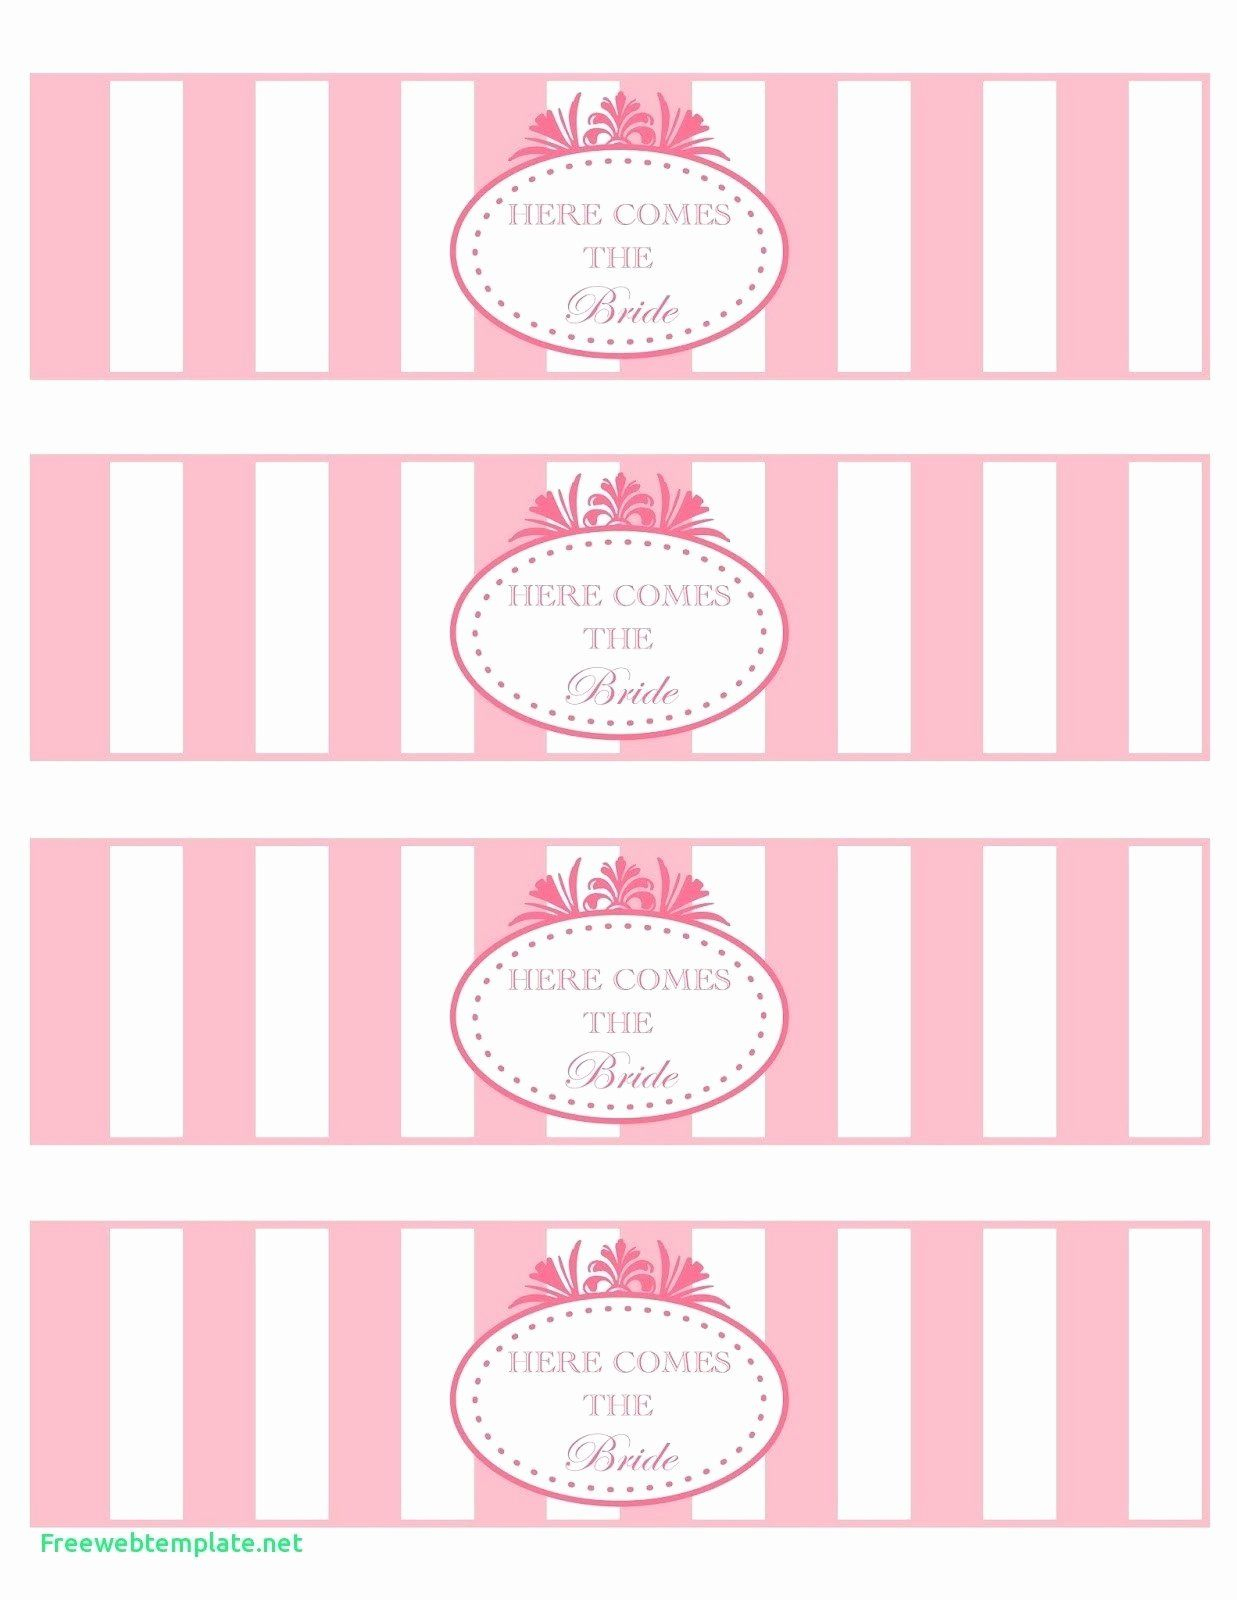 Free Water Bottle Label Template Baby Shower Fresh Printable Water within Free Printable Baby Shower Label Templates